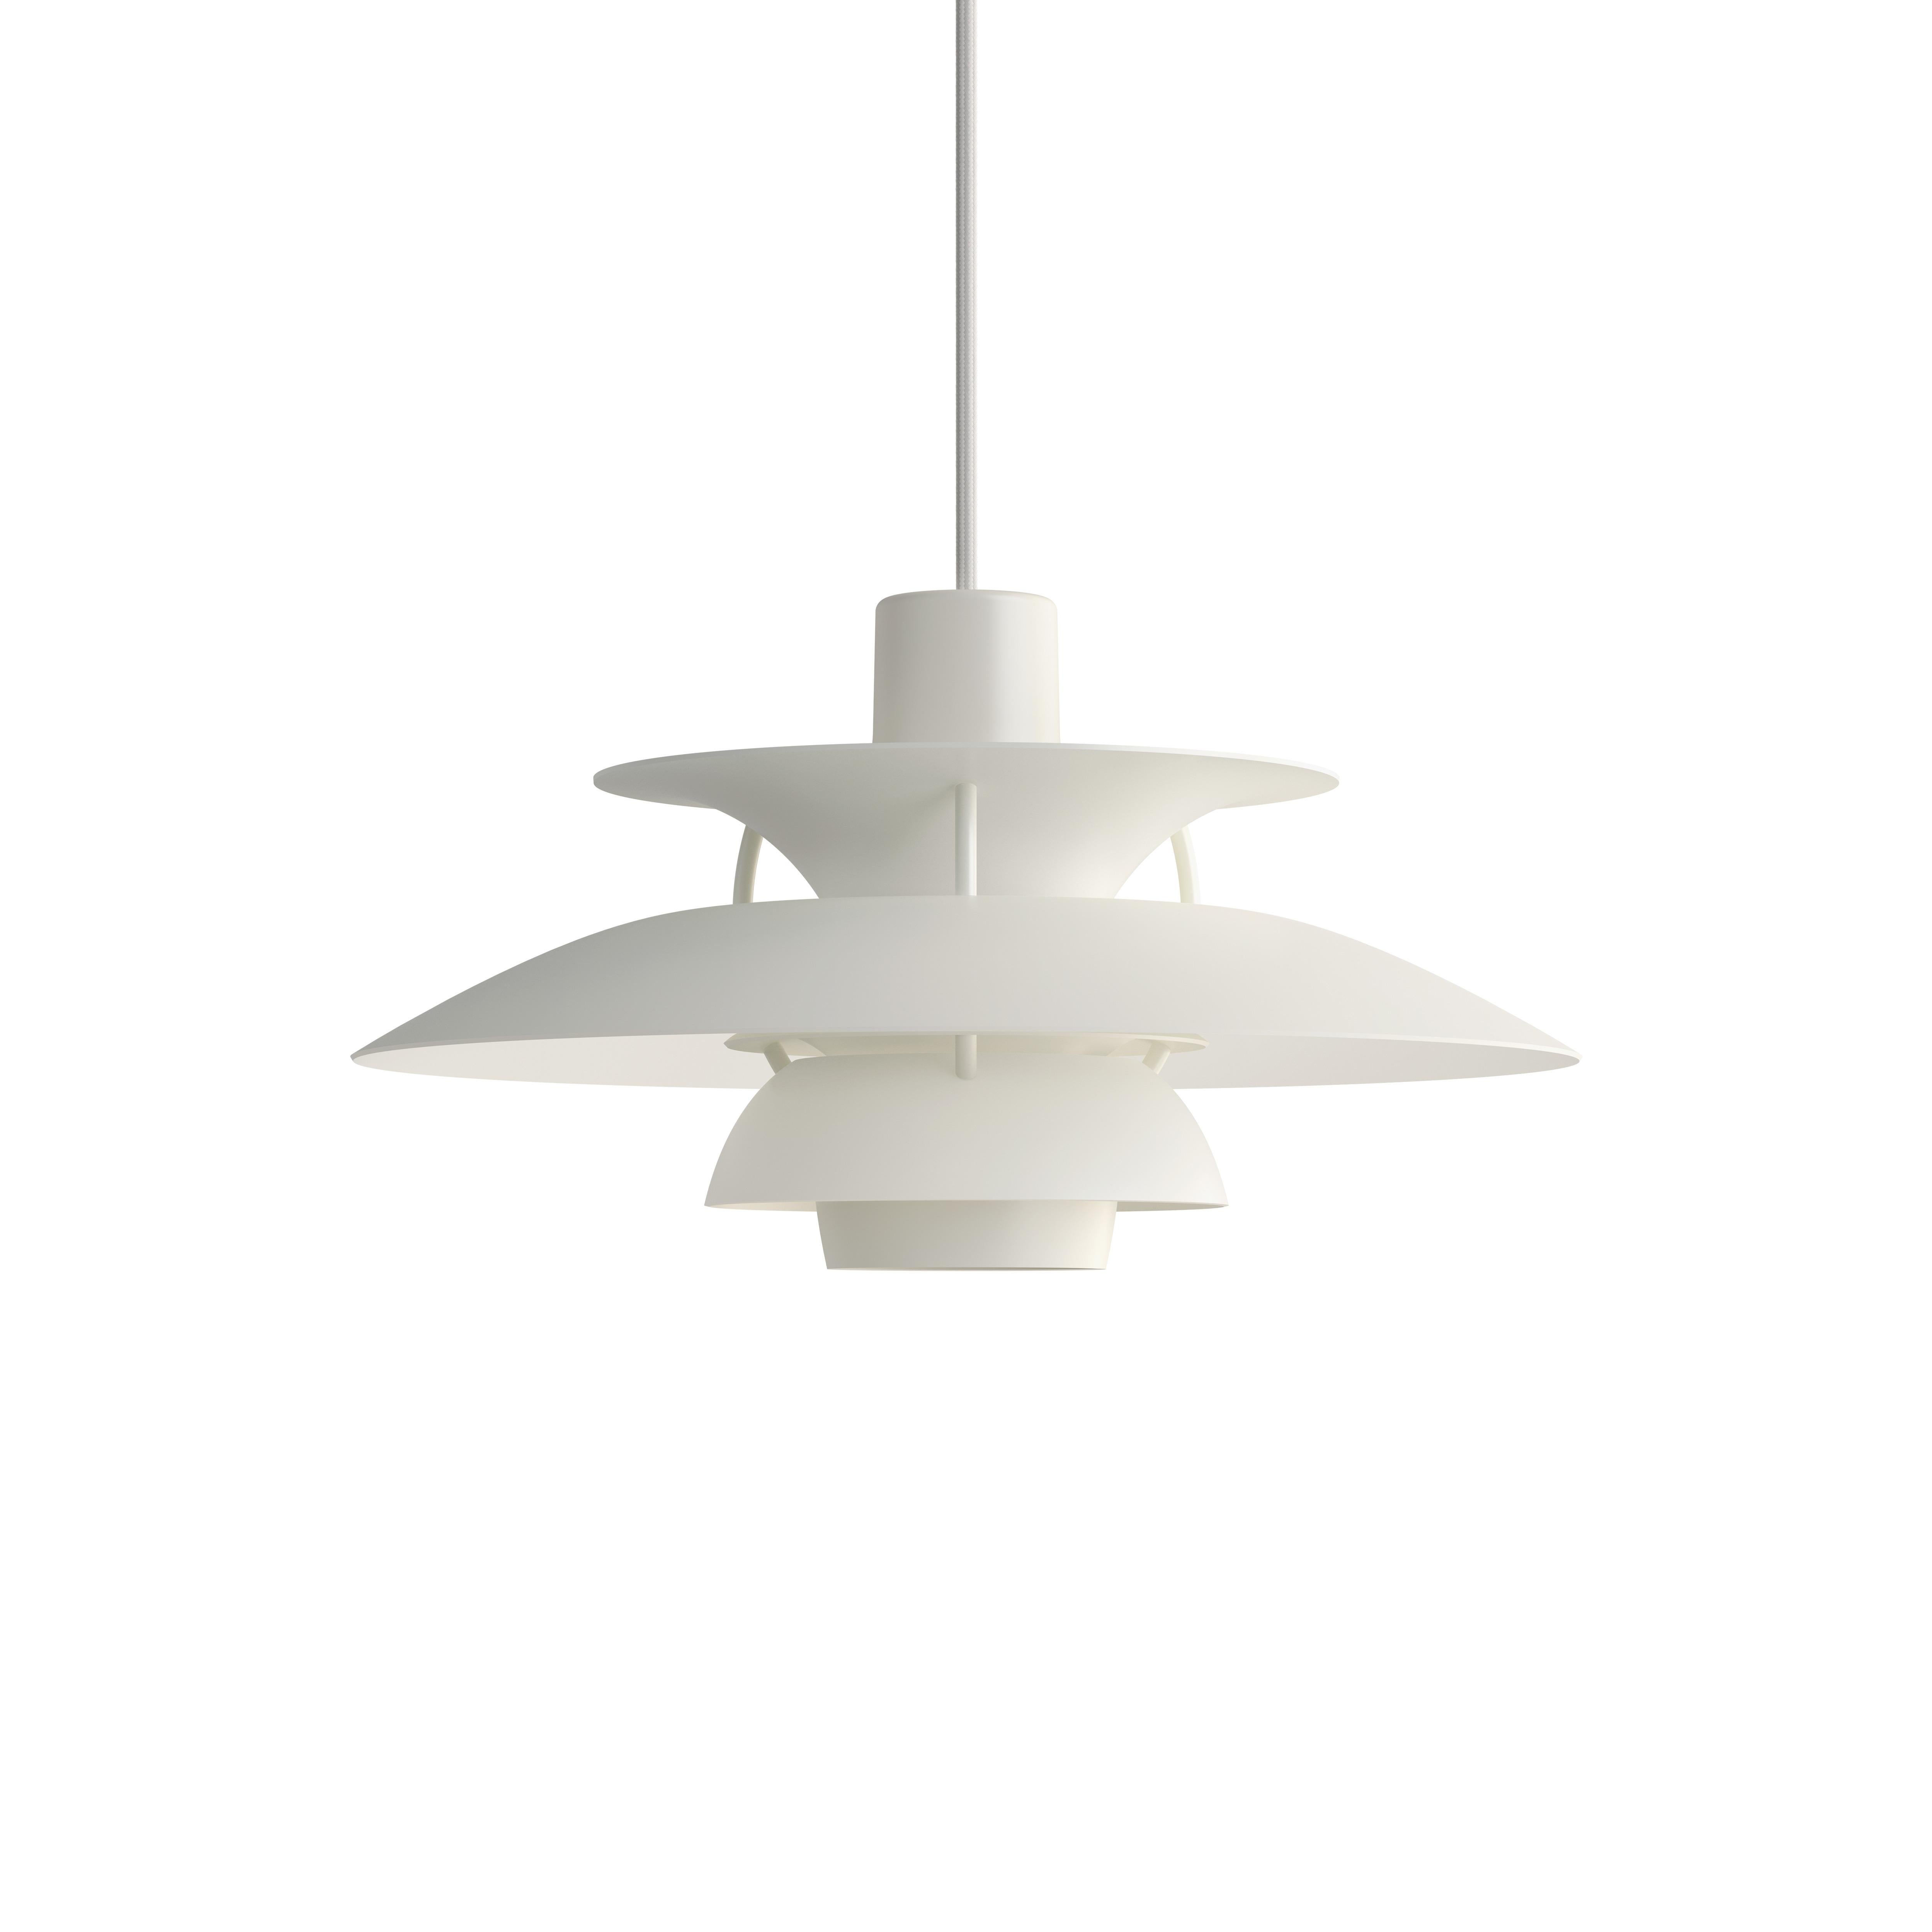 Poul Henningsen developed the PH 5 in 1958 in response to constant changes made to the shape and size of incandescent bulbs by bulb manufacturers, naming it after the size of the pendant’s main shade, which is 50 cm in diameter. When the lamp was